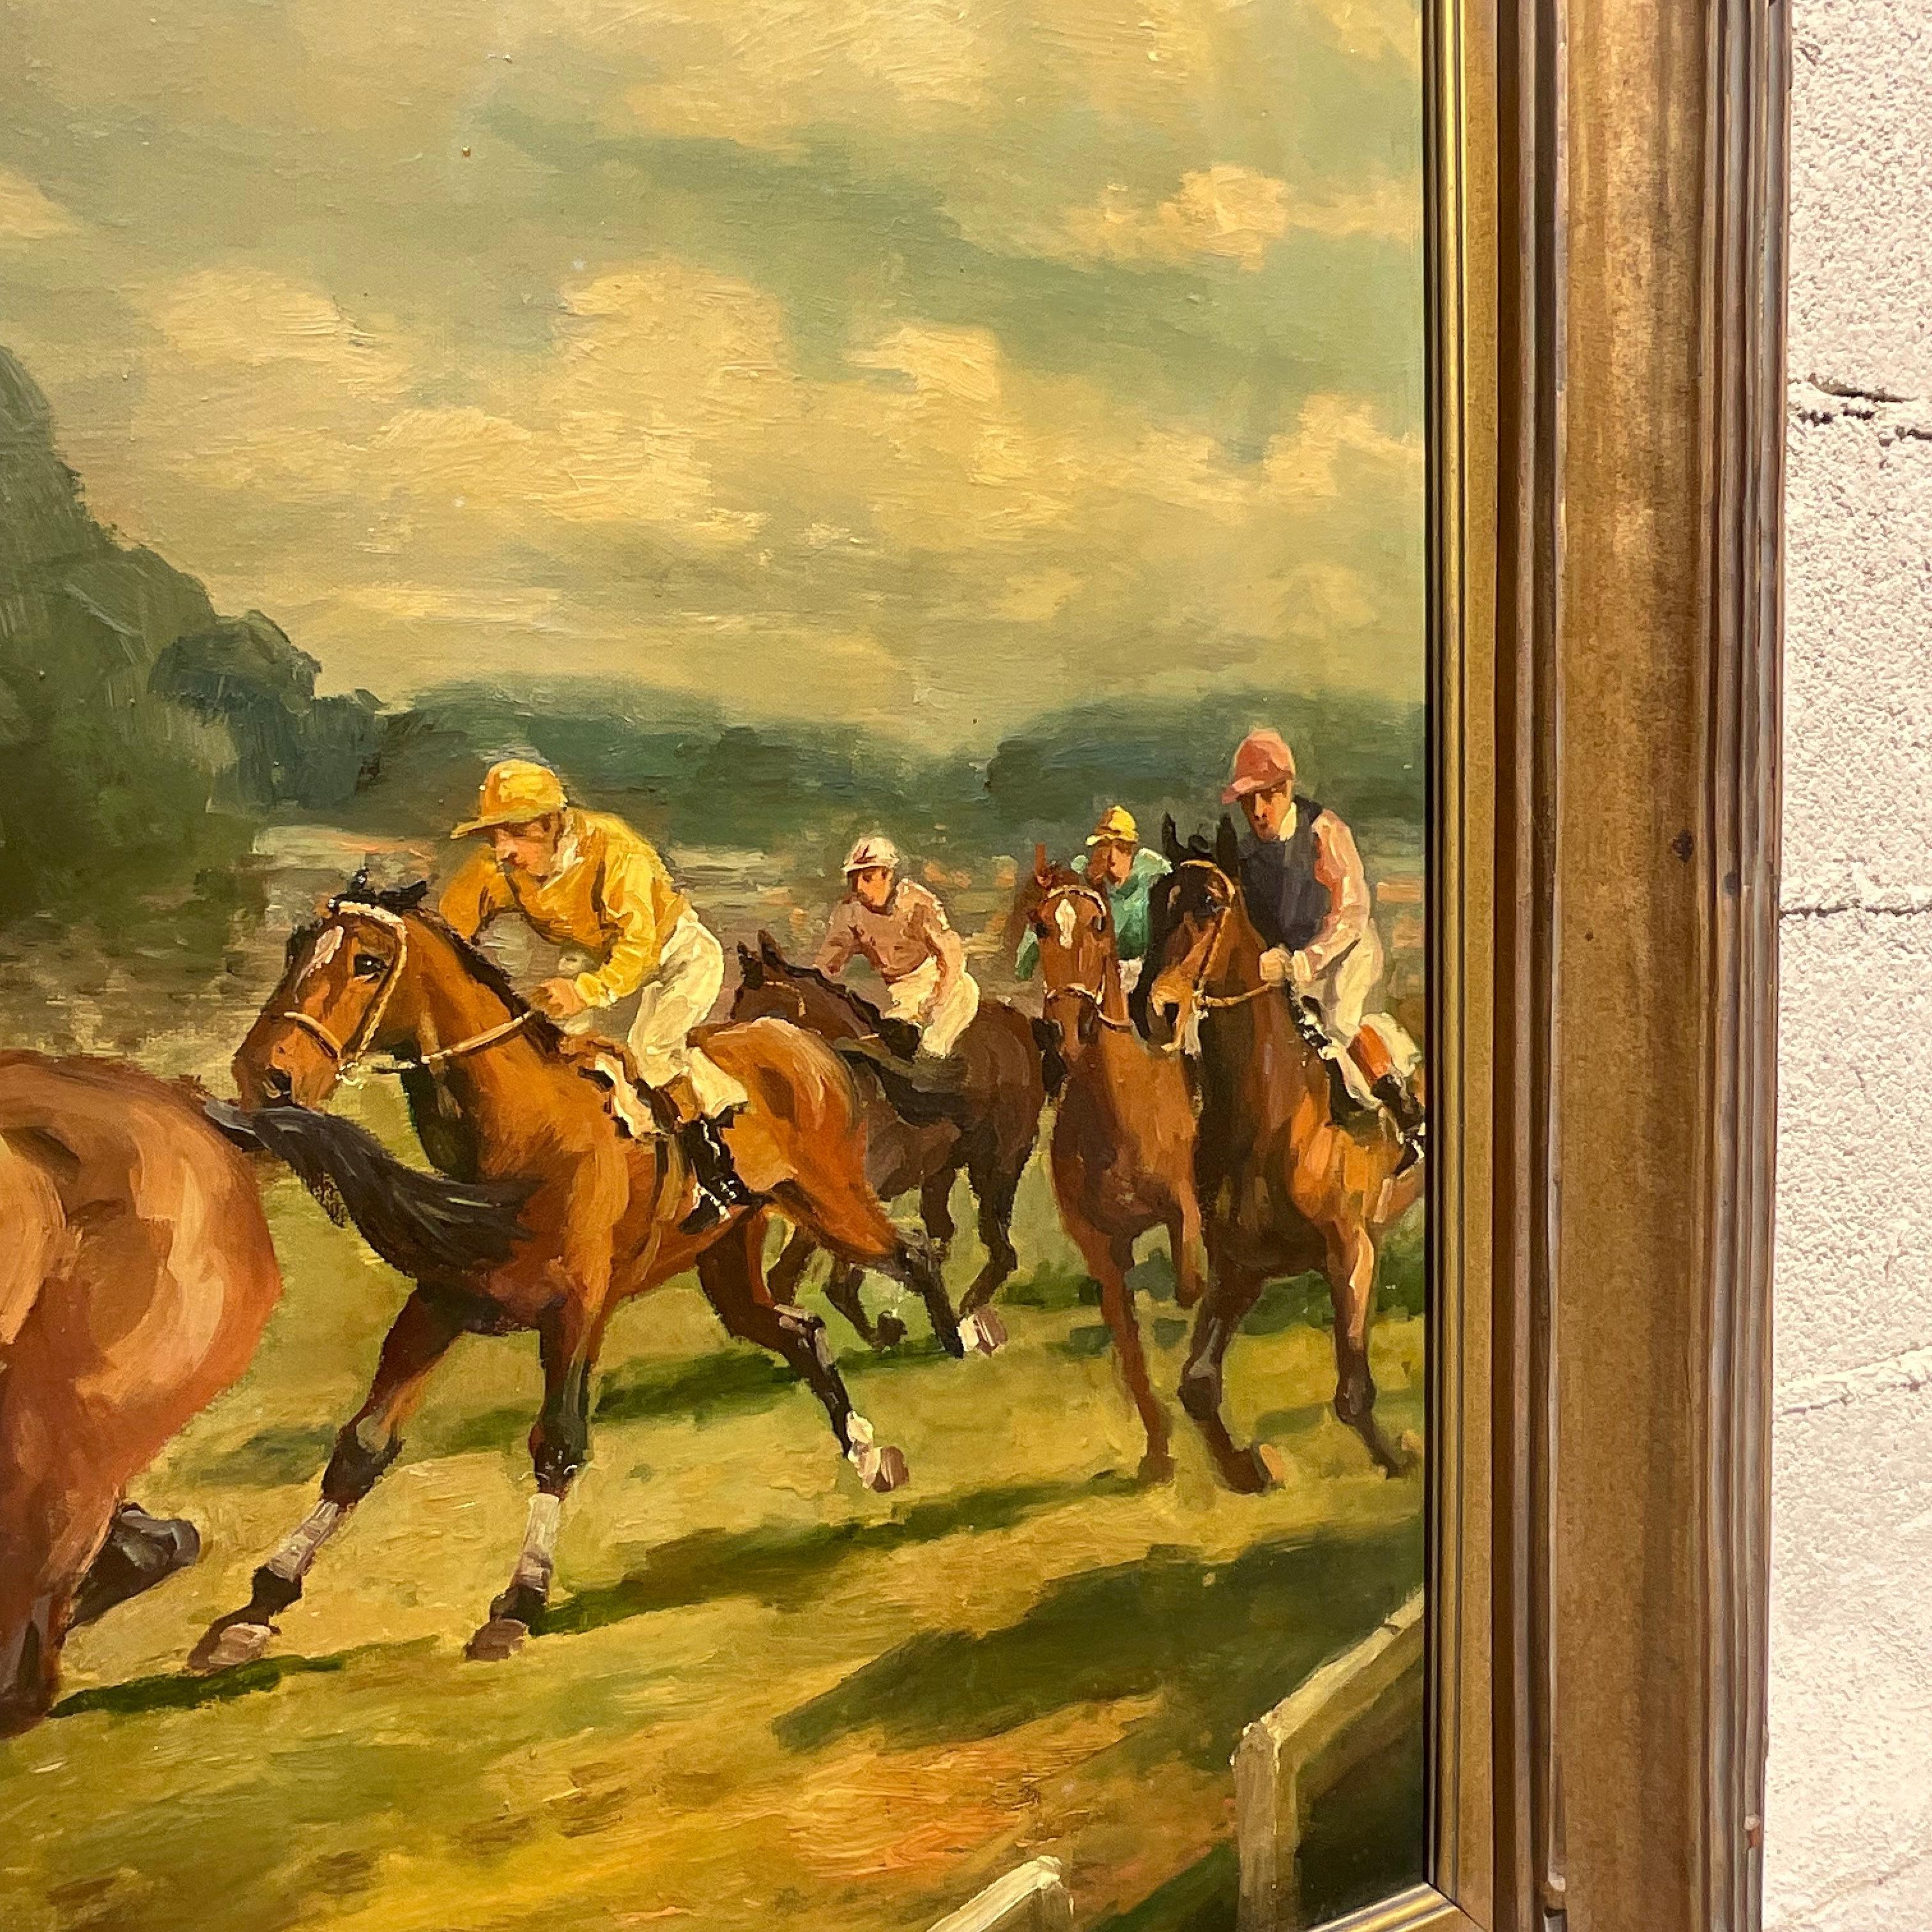 Vintage Boho Signed Equestrian Original Oil Painting on Canvas In Good Condition For Sale In west palm beach, FL